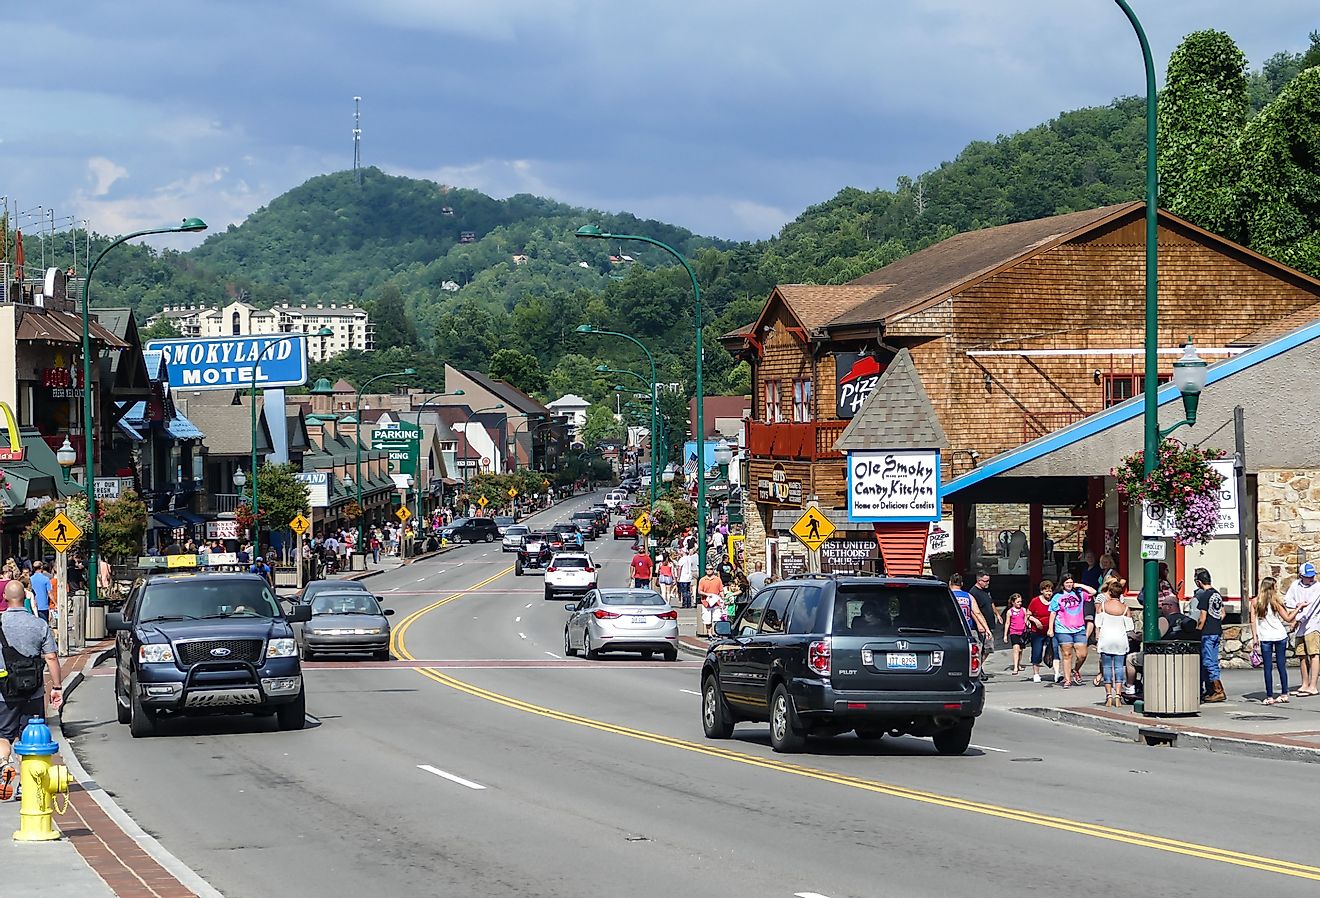 Busy street in summer time with tourist and car in Gatlinburg, Tennessee. Image credit Miro Vrlik Photography via Shutterstock